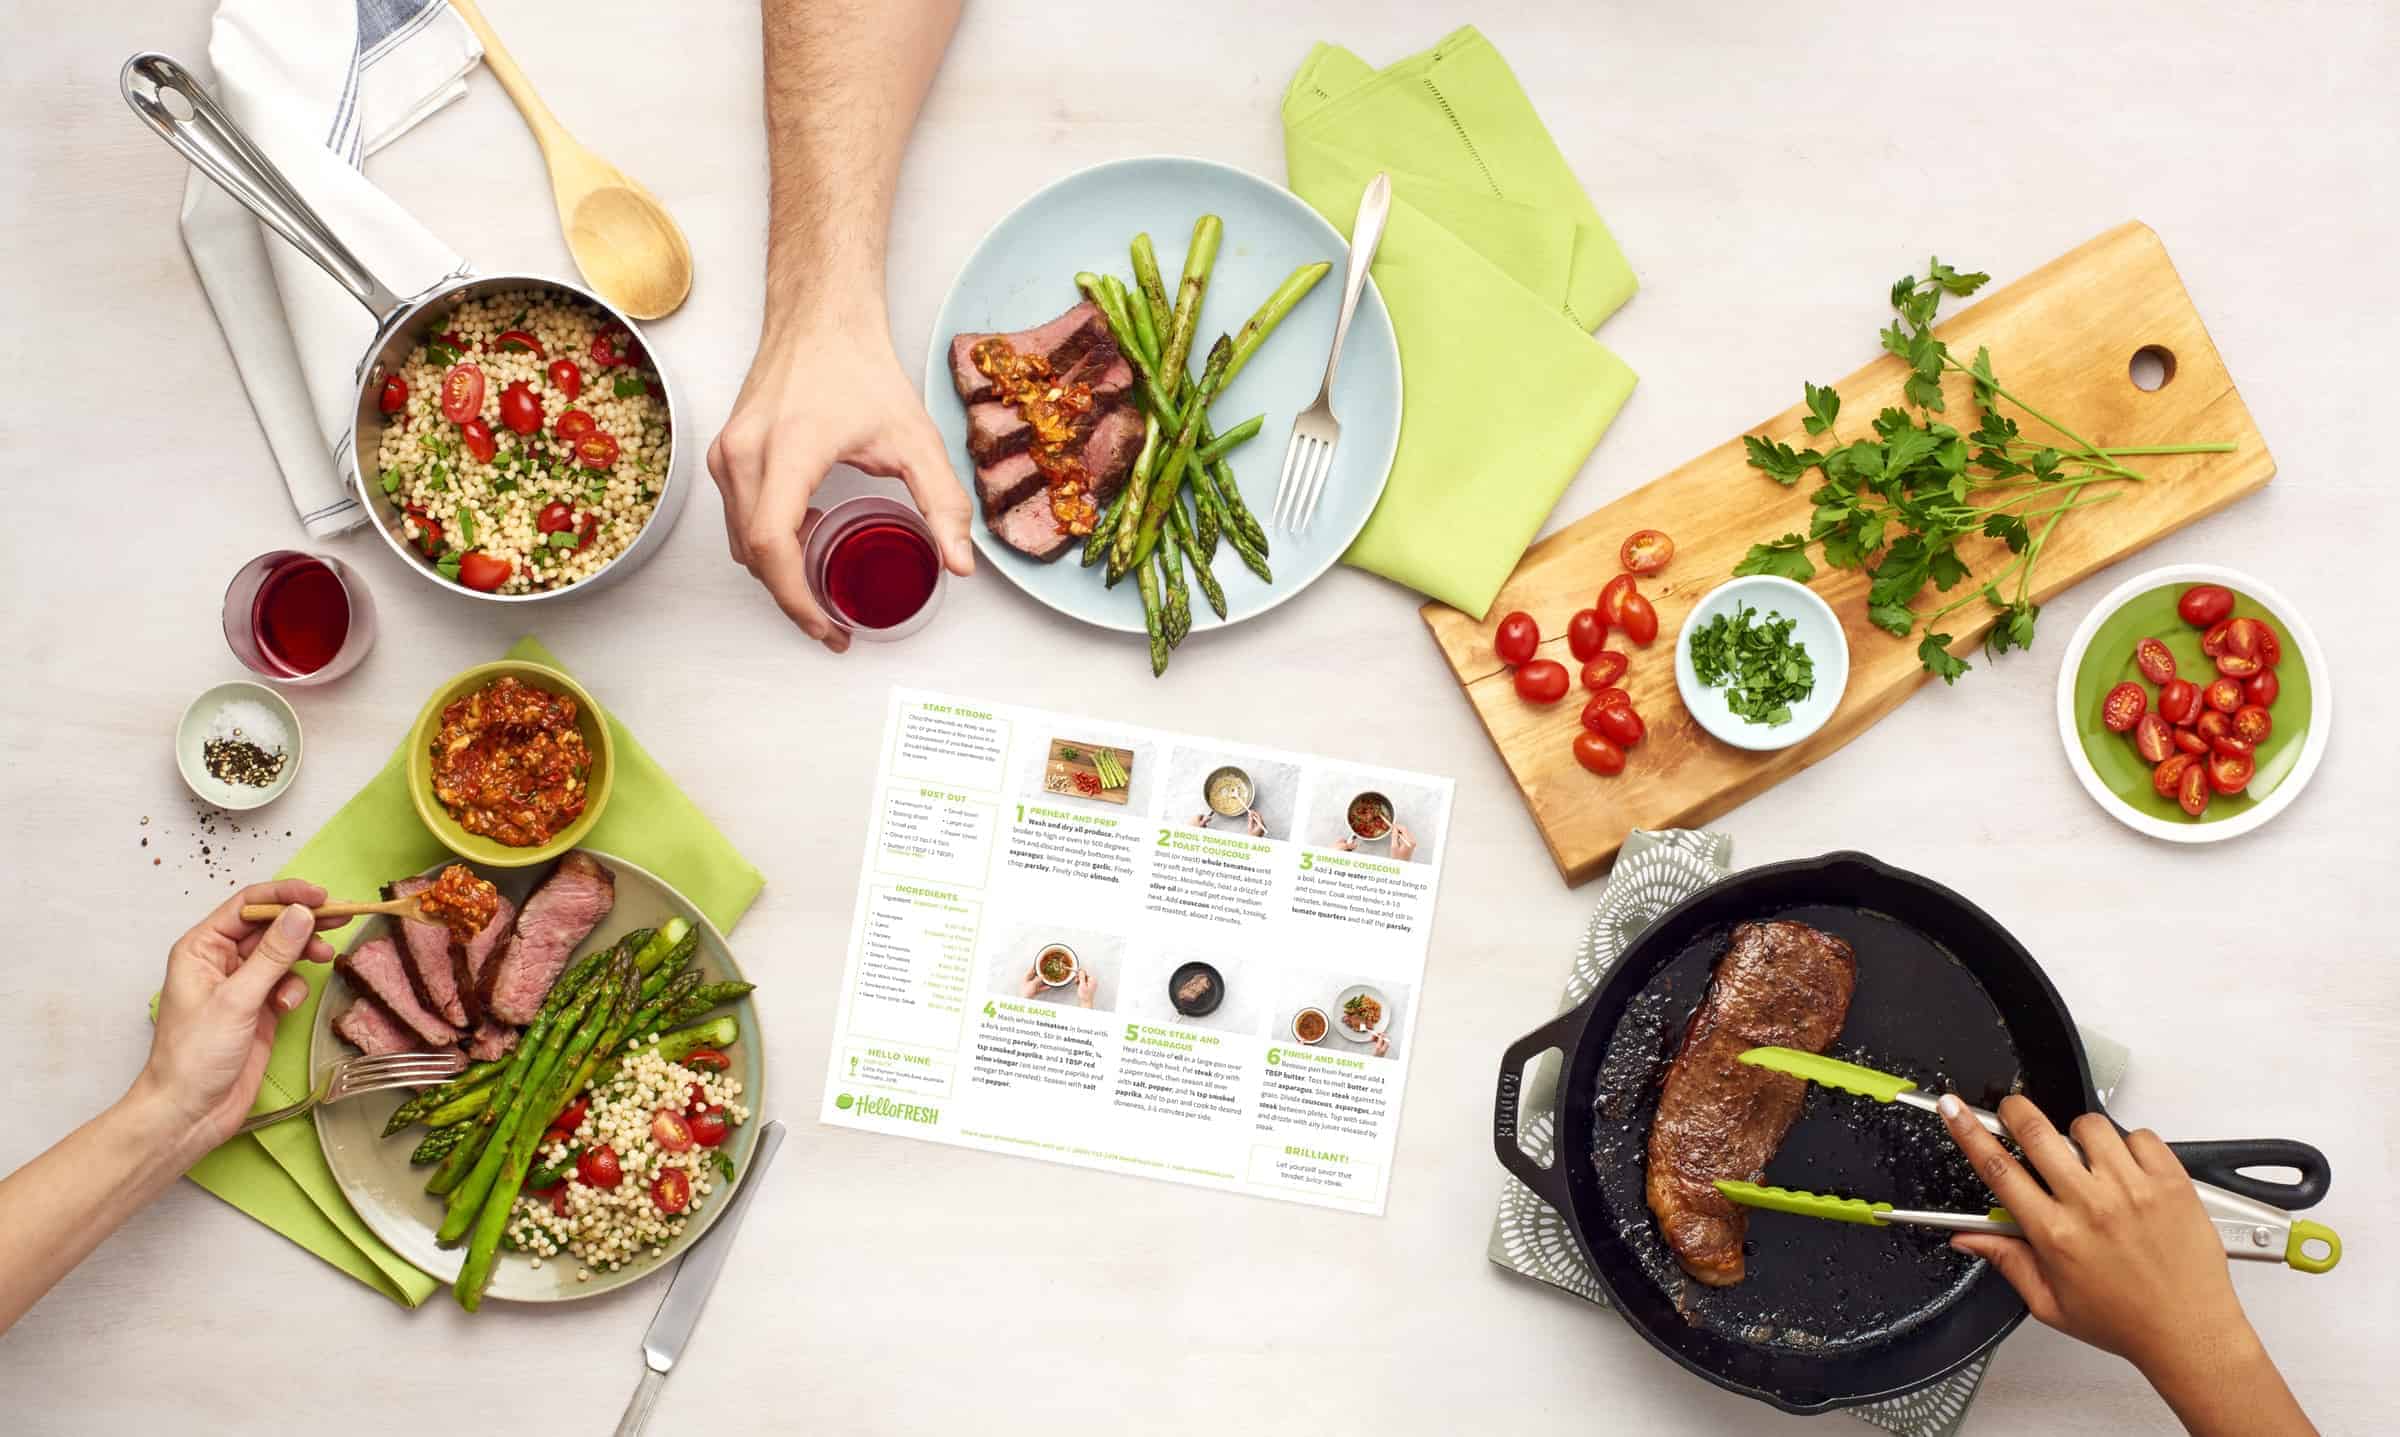 Meal kit services compared - Hello Fresh steak asparagus dinner with menu card